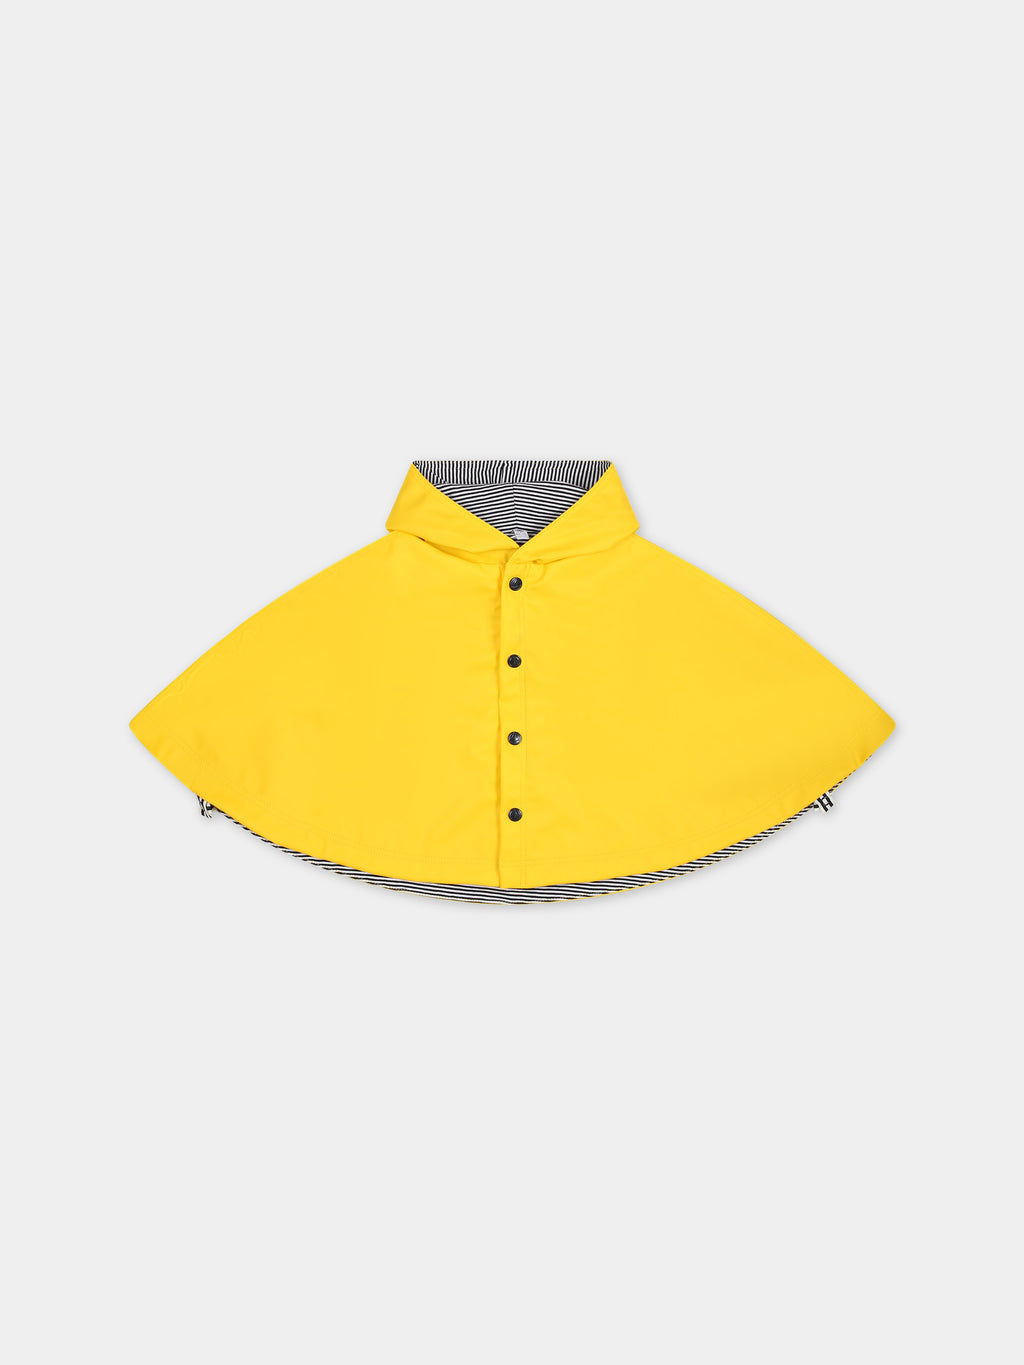 Yellow cape for baby kids